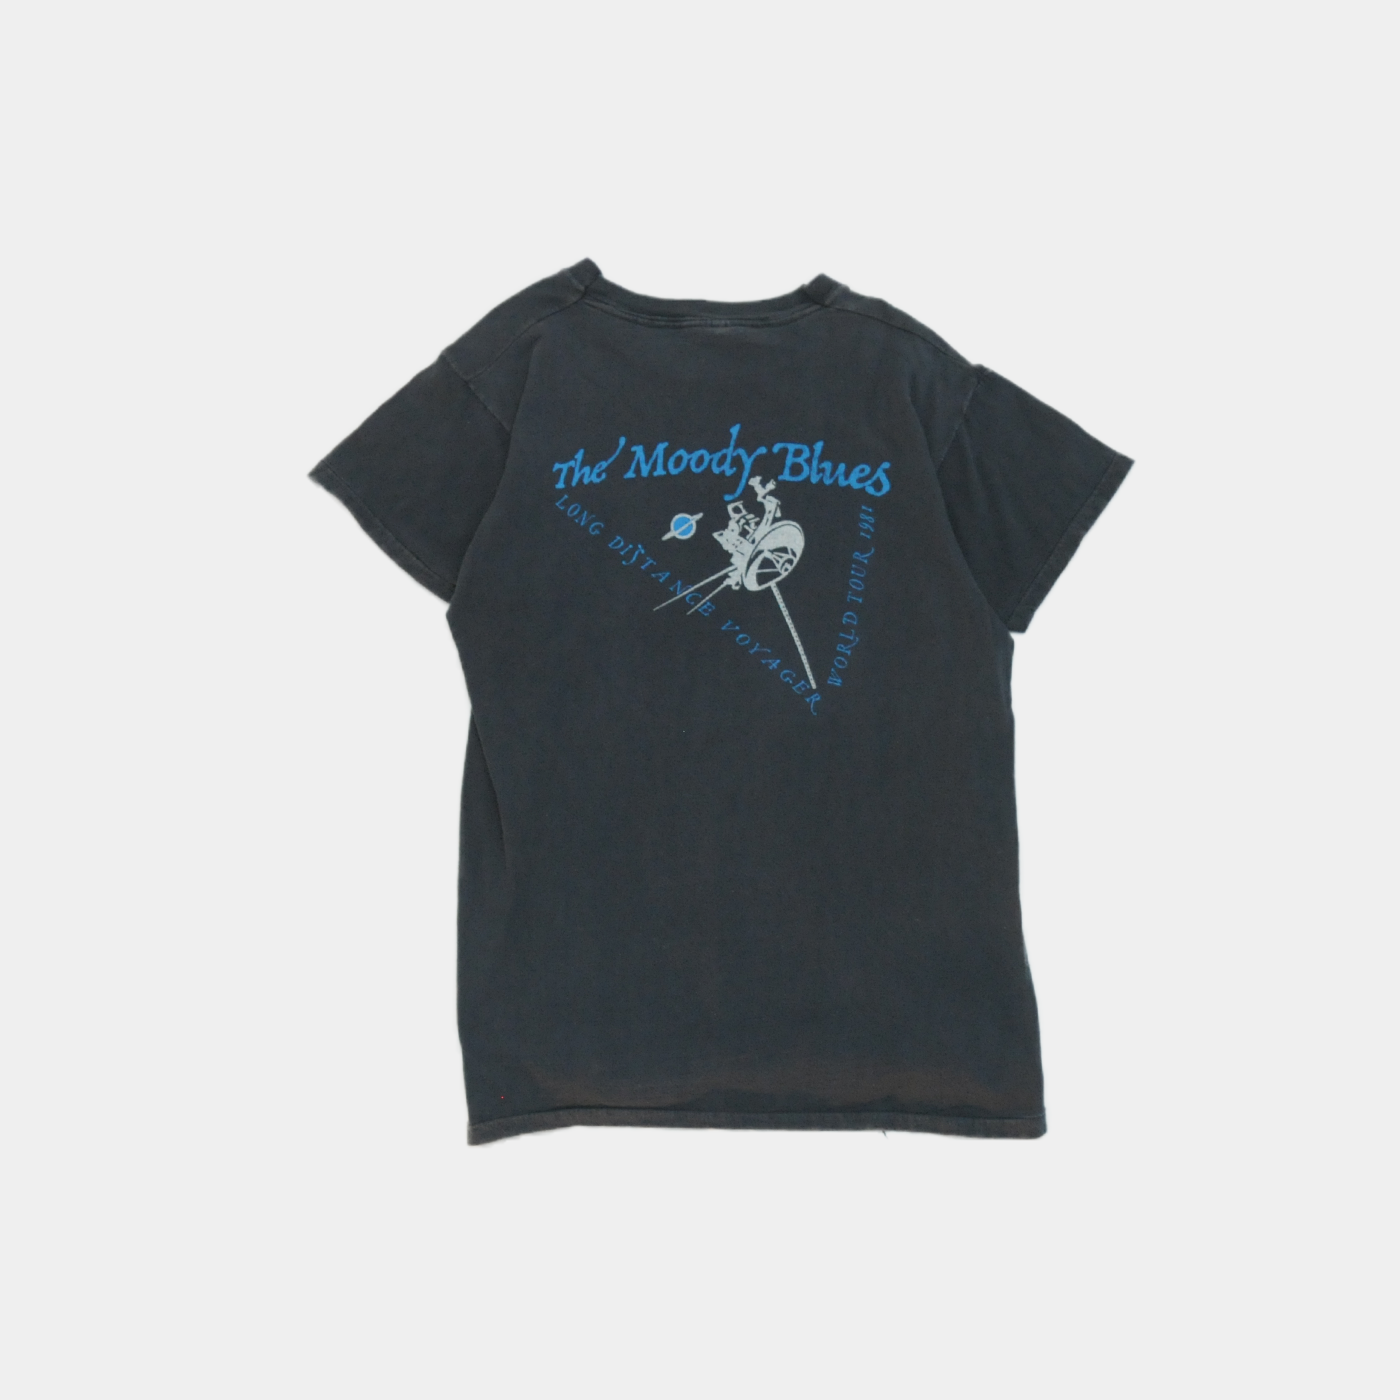 The Moody Blues T-shirts Used